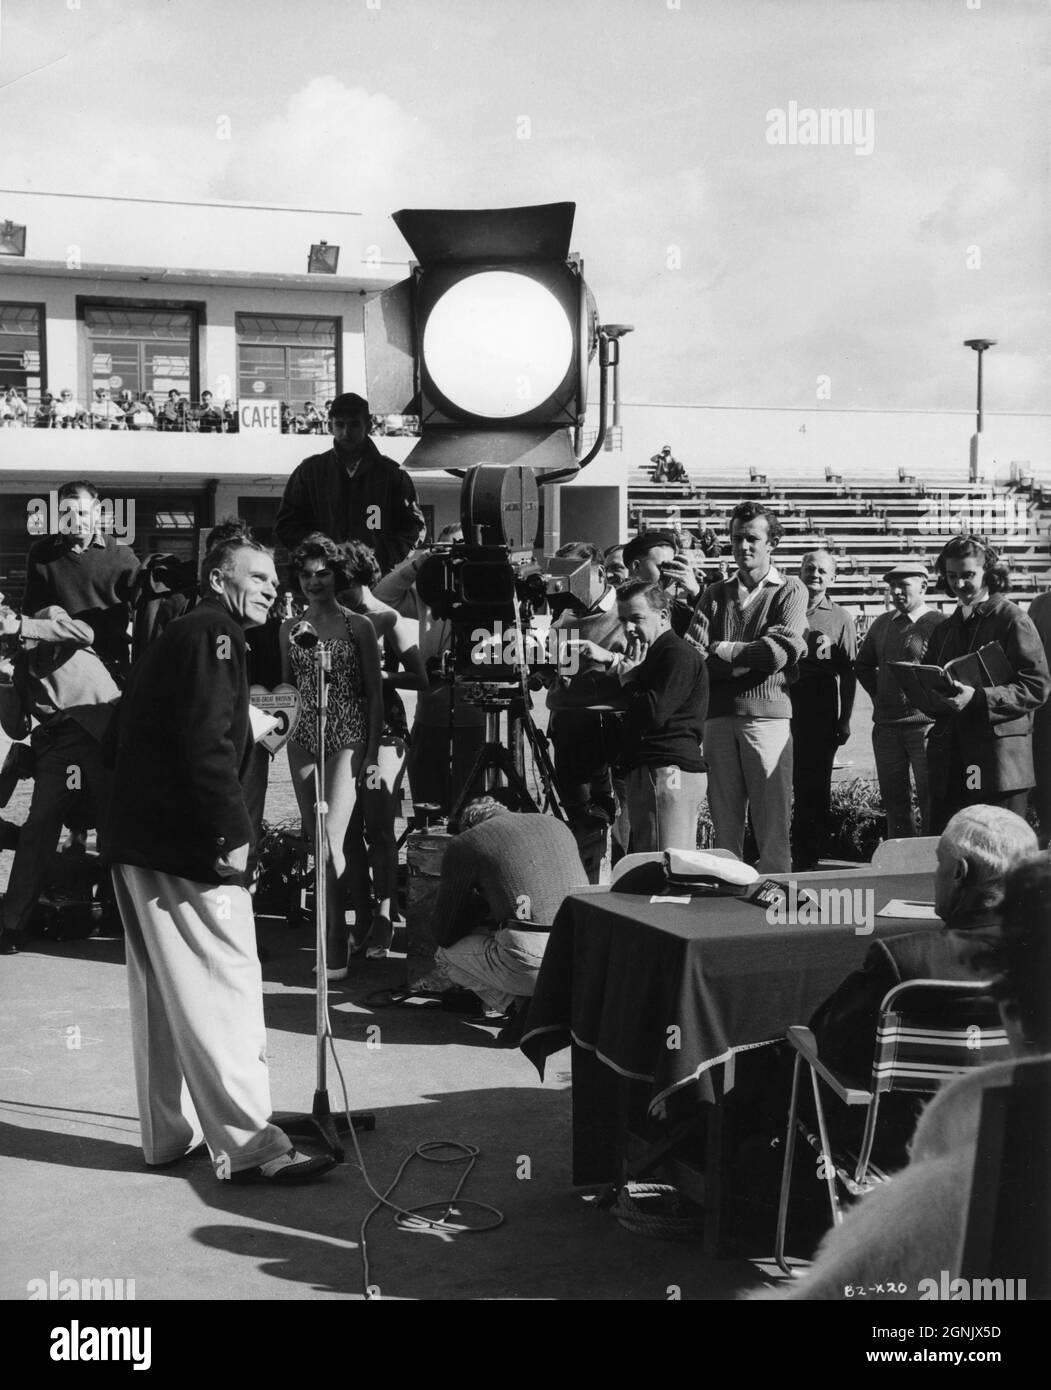 LAURENCE OLIVIER as Archie Rice comperes a Beauty Contest on set location candid in Morecambe Lancashire with Movie Crew and Director TONY RICHARDSON (standing to right of Camera with arms folded) during filming of THE ENTERTAINER 1960 director TONY RICHARDSON screenplay John Osborne and Nigel Kneale adapted from the play by John Osborne music John Addison producer Harry Saltzman Woodfall Film Productions / British Lion Films (UK) - Continental Distributing (US) Stock Photo